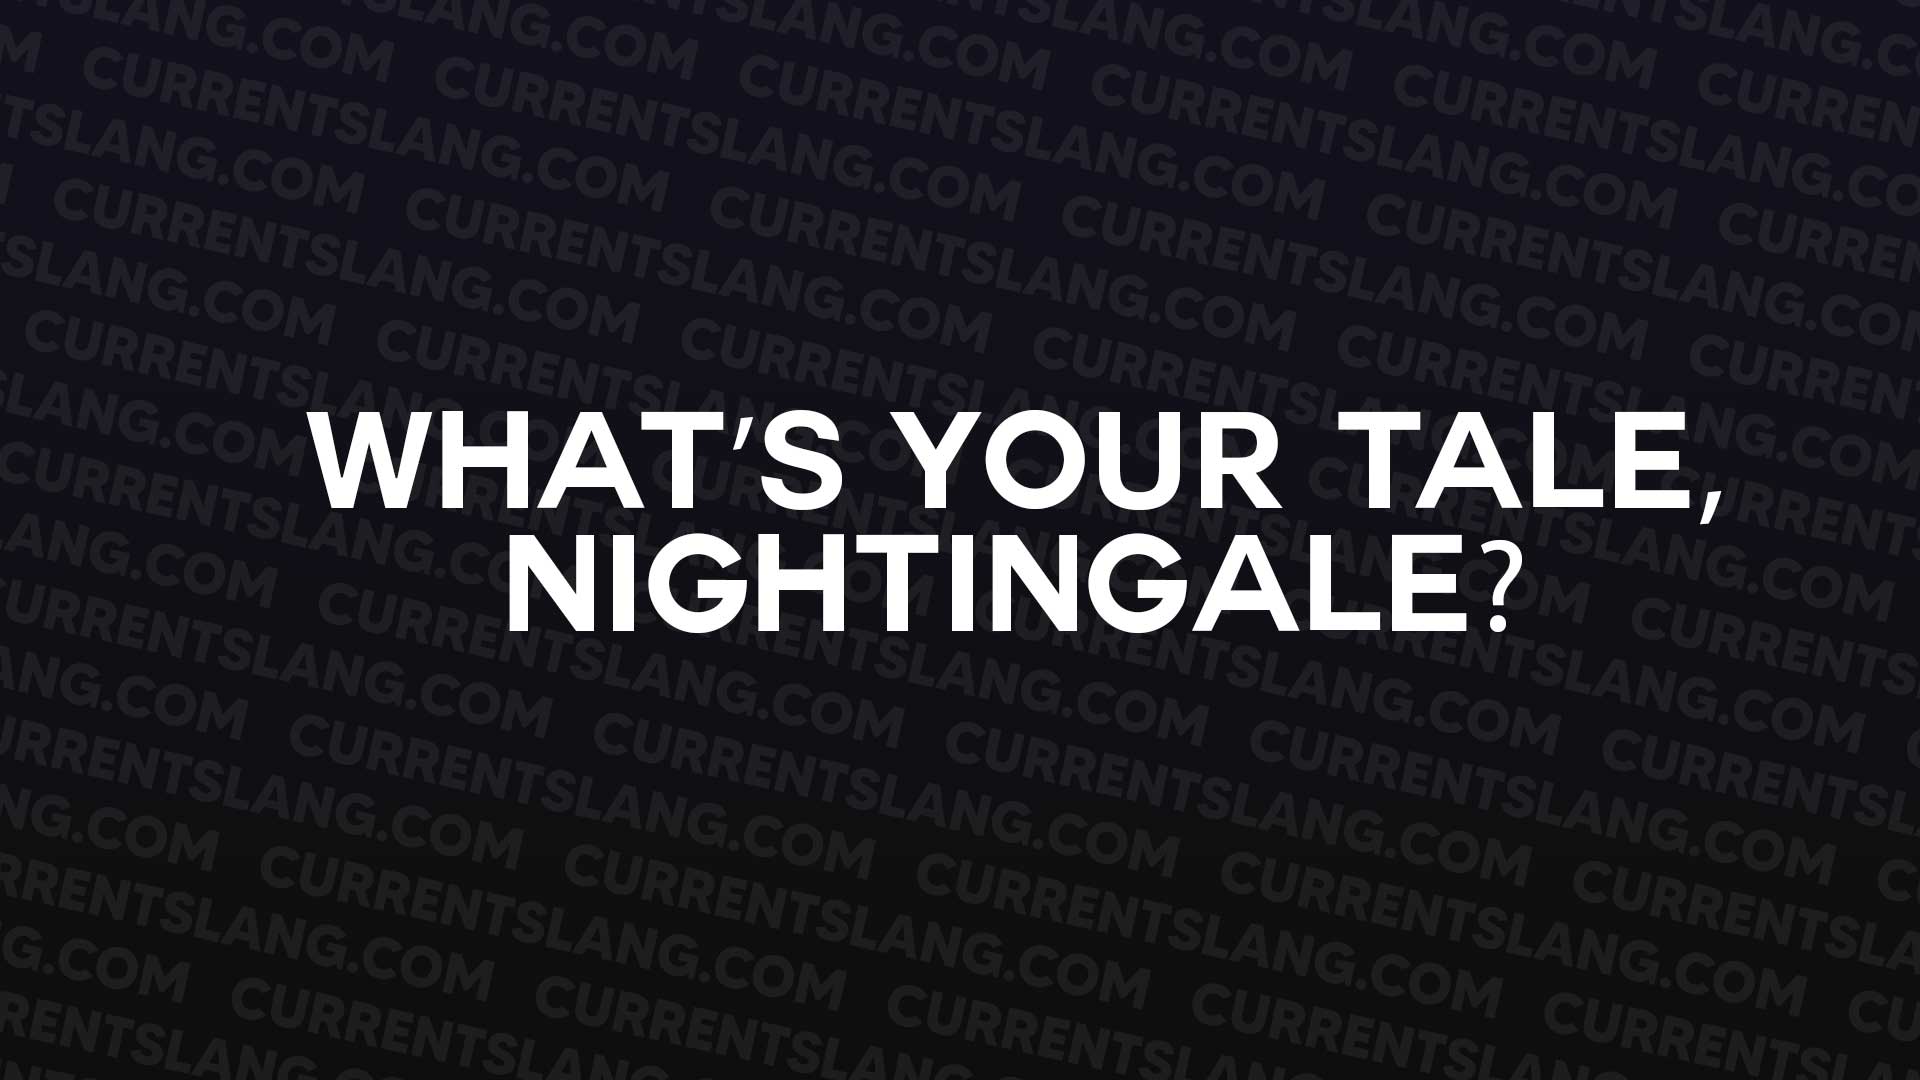 title image for What’s your tale, nightingale